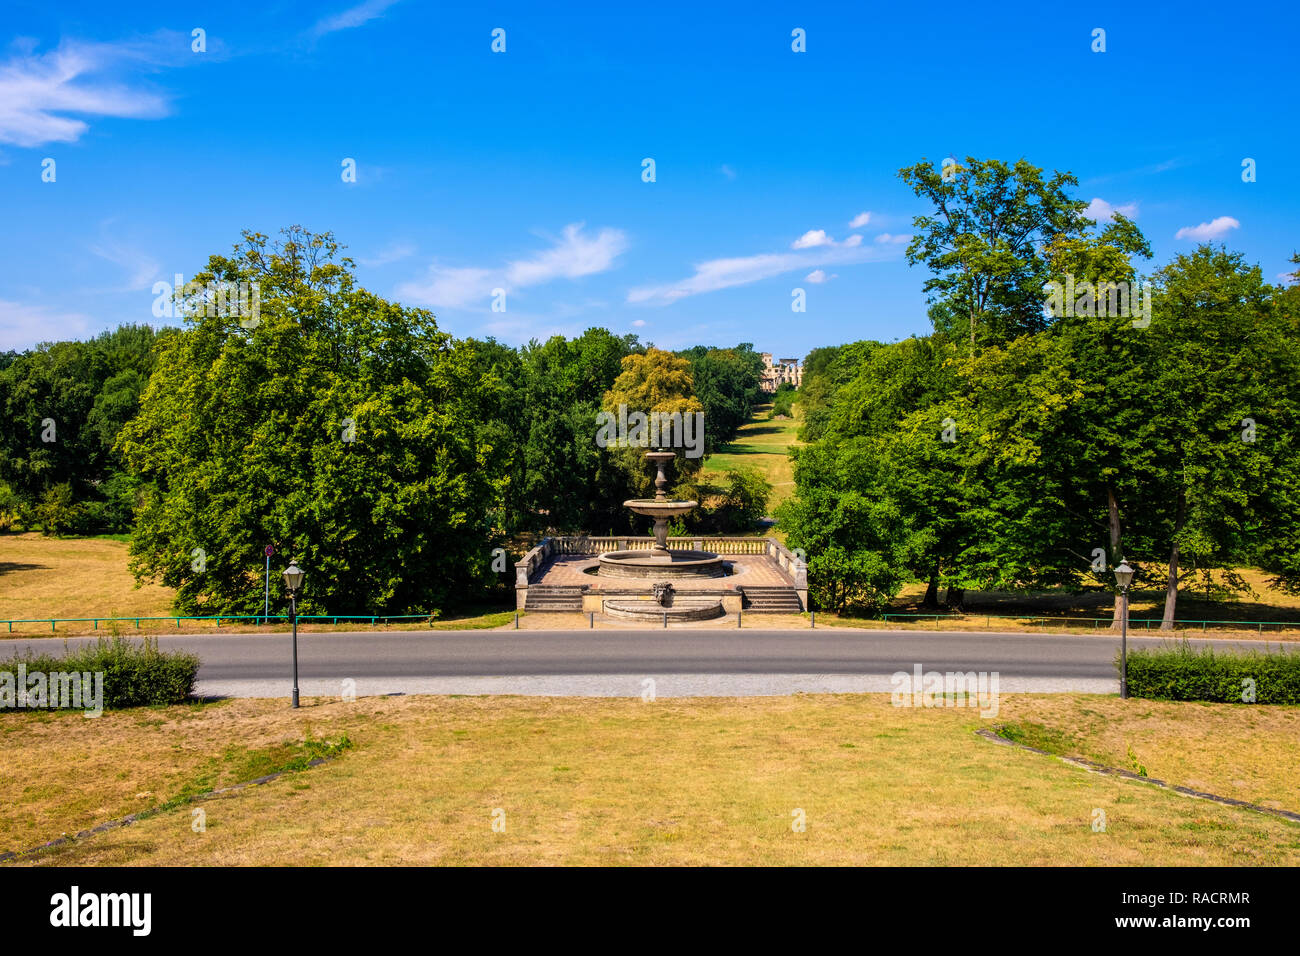 Potsdam, Brandenburg / Germany - 2018/07/29: Panoramic view of the Ruinenberg hill with Rossbrunnen waterworks in the historic Bornstedt quarter of Po Stock Photo